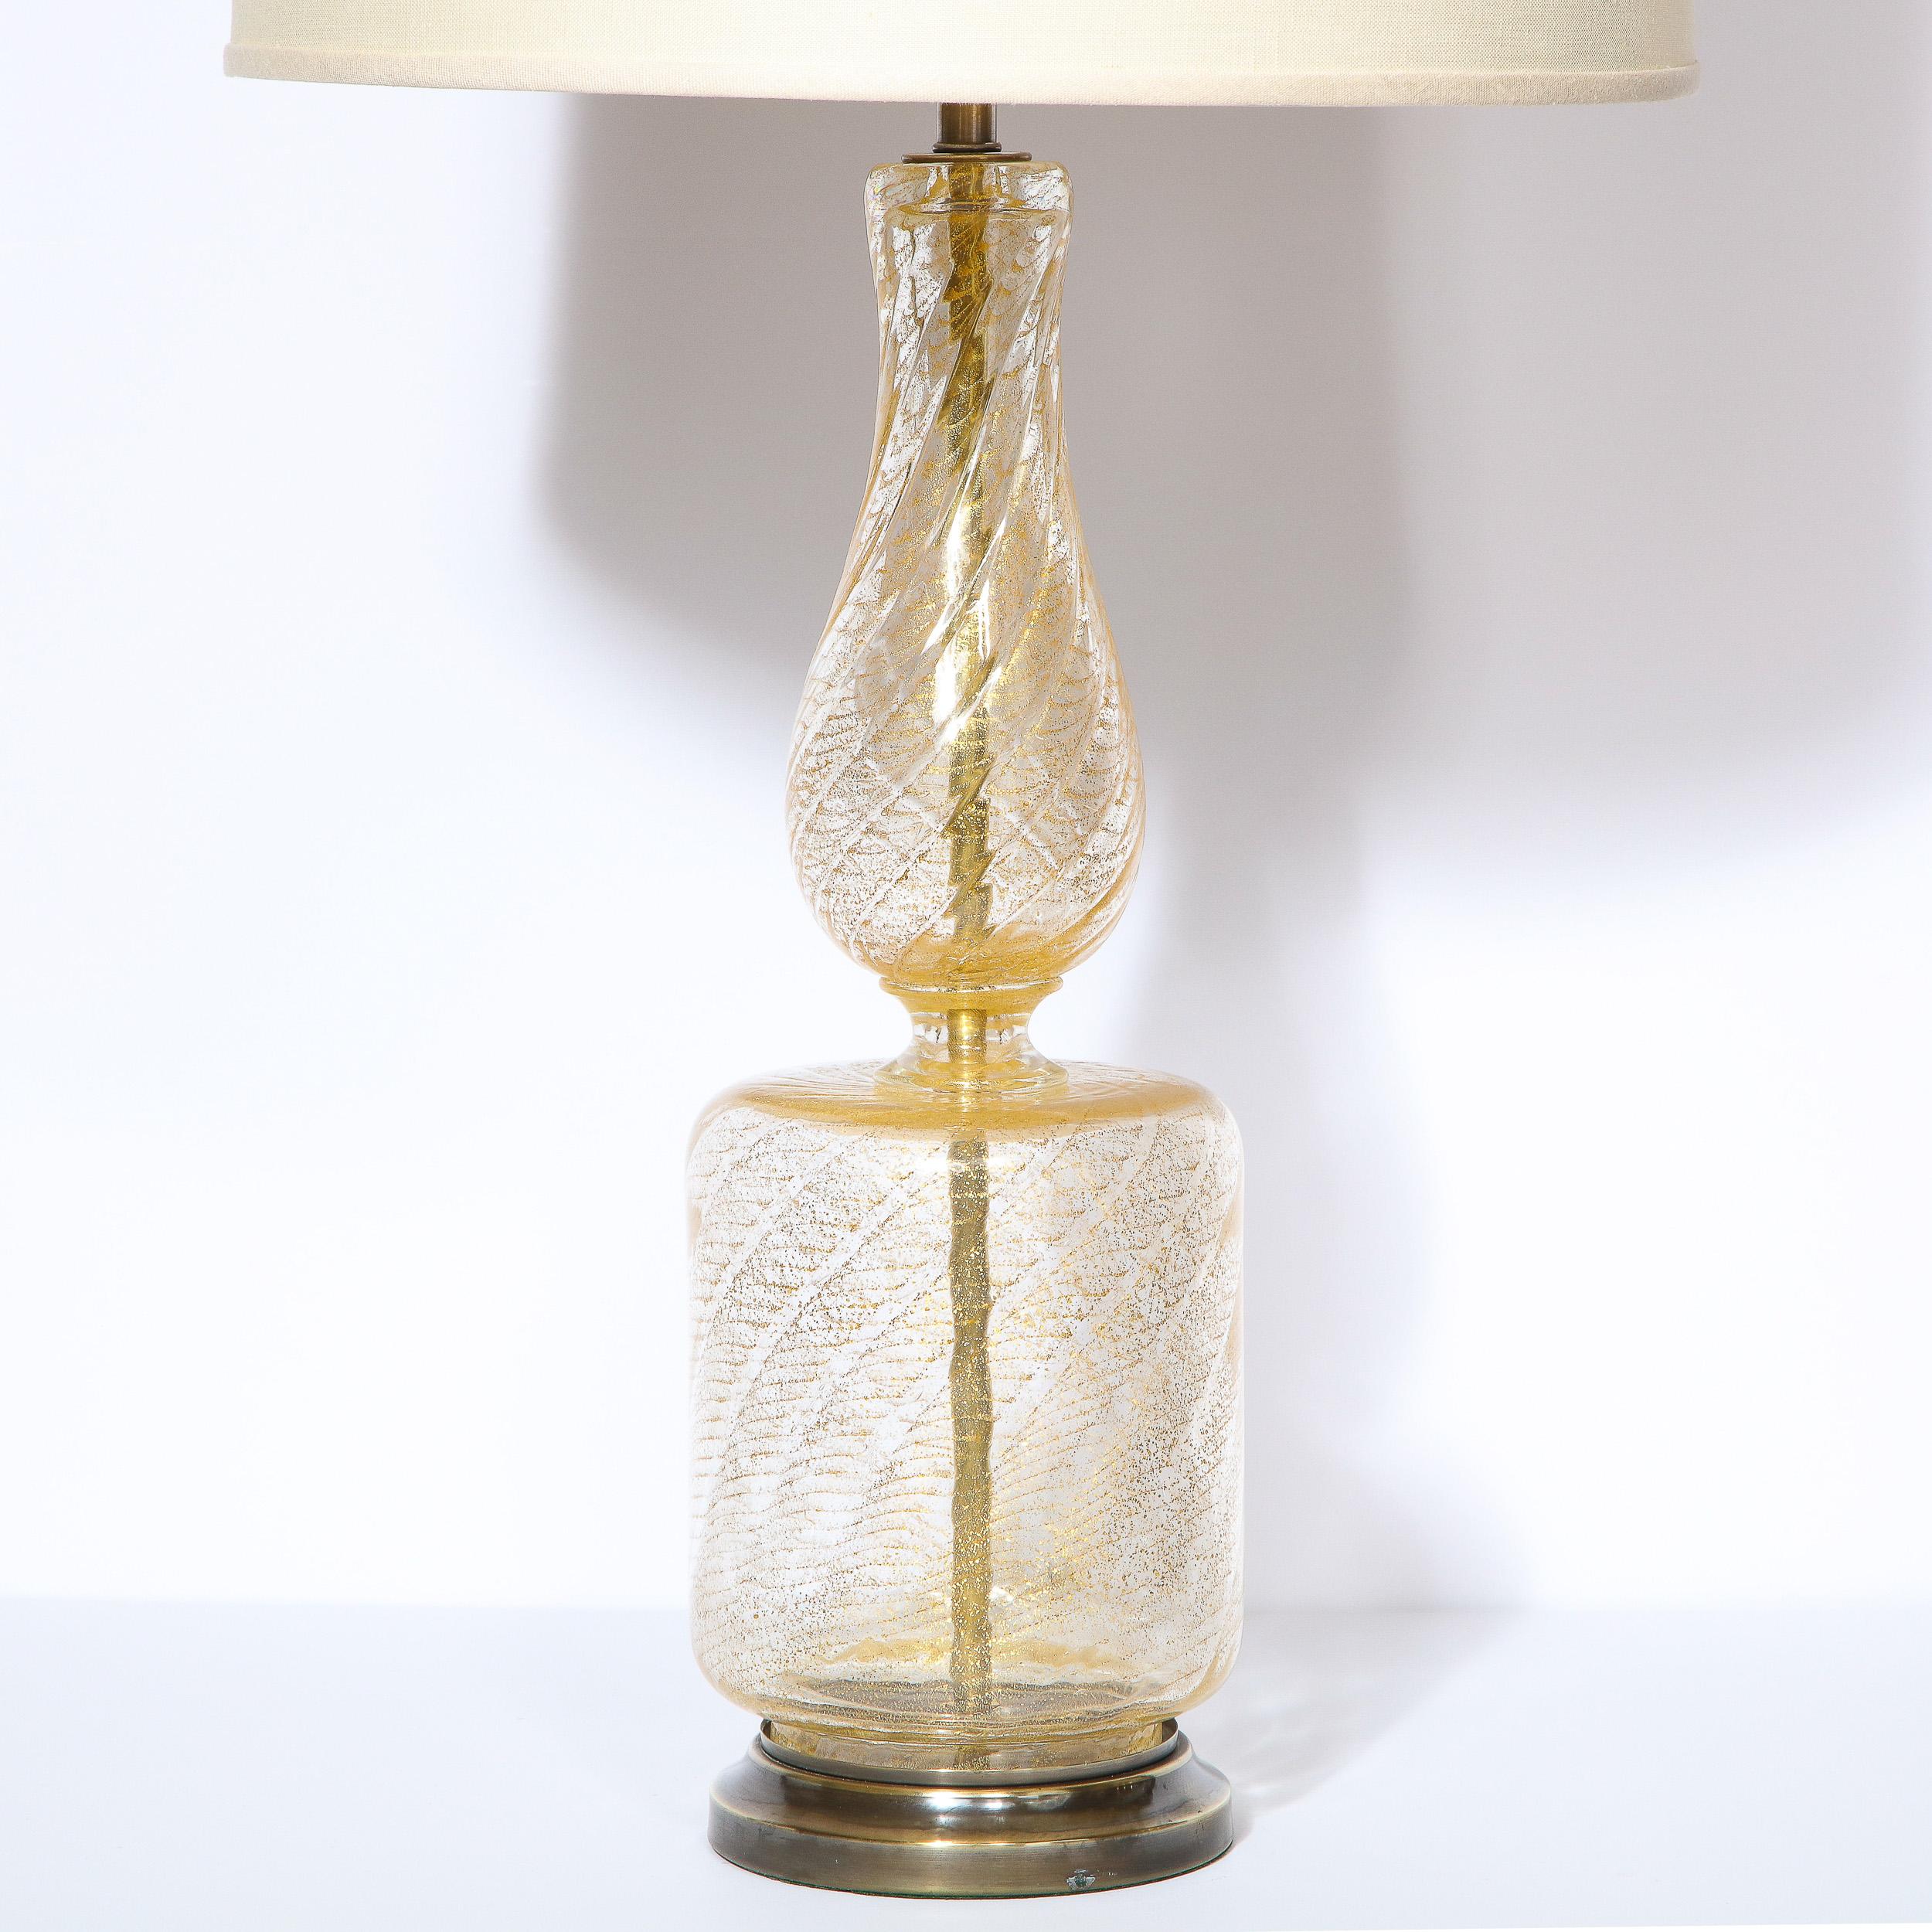 Italian Pair of Mid Century Glass Table Lamps with 24kt Yellow Gold Flecks & Brass Bases